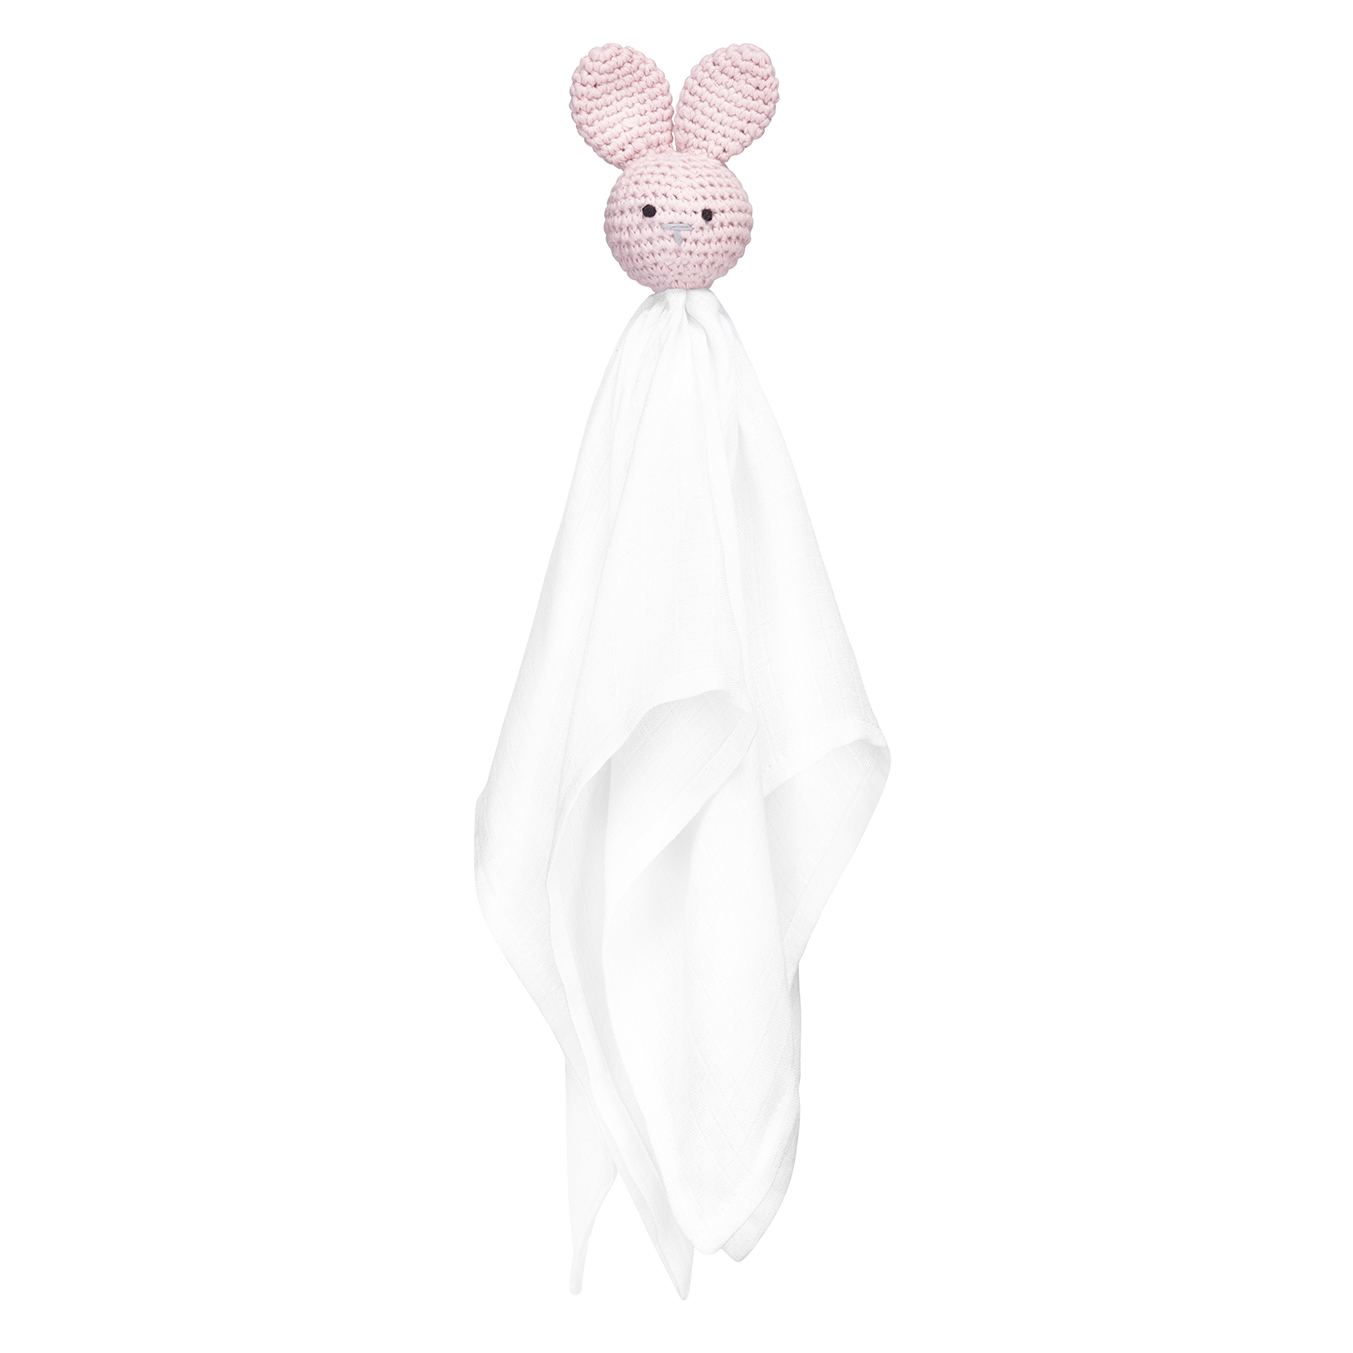 Snuggle toy Bunny -  dusty pink